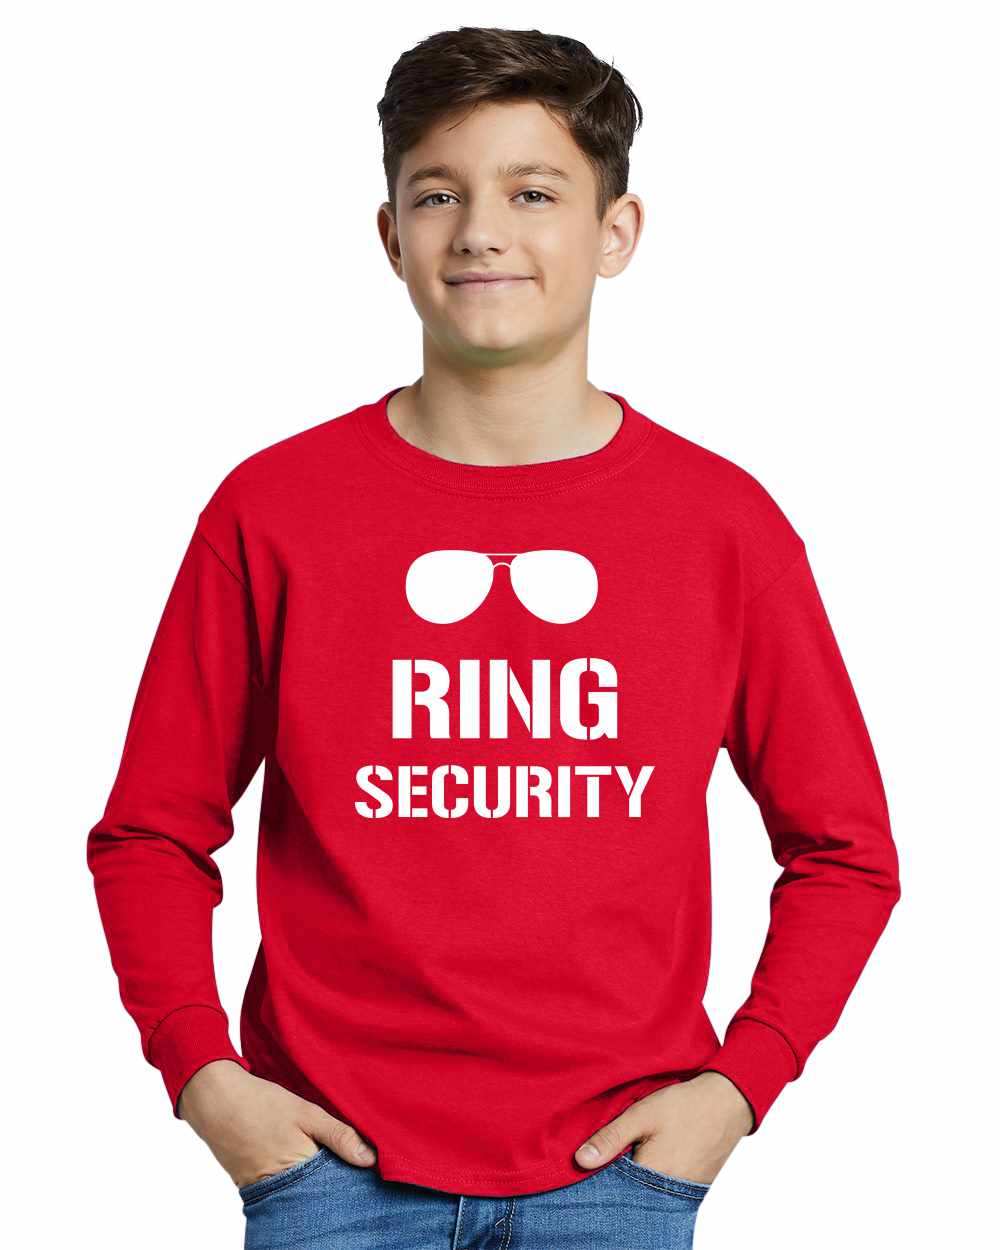 Ring Security on Youth Long Sleeve Shirt